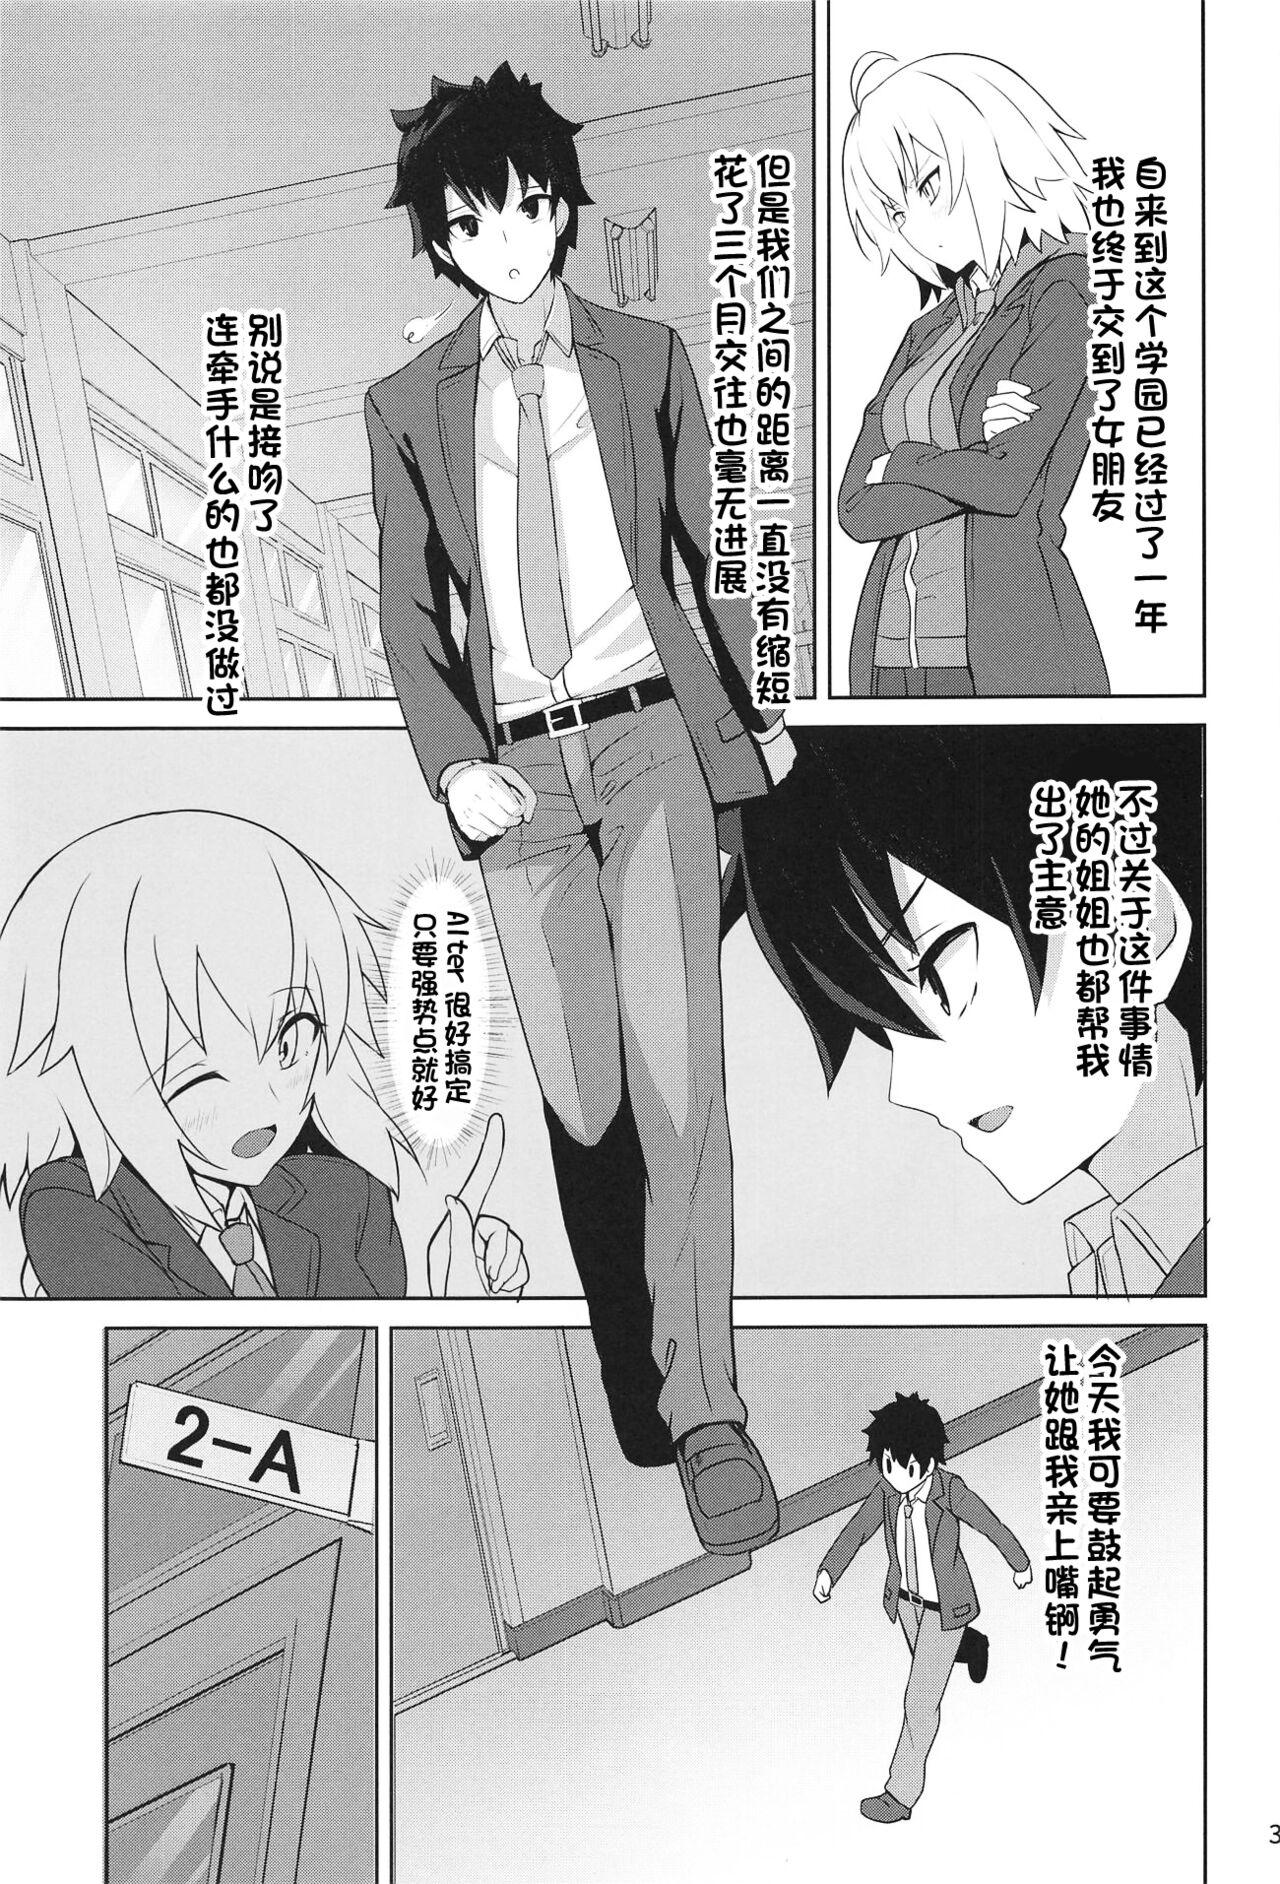 Red Head ときめきカルデア学園オルタナティ部 - Fate grand order Petite - Page 2